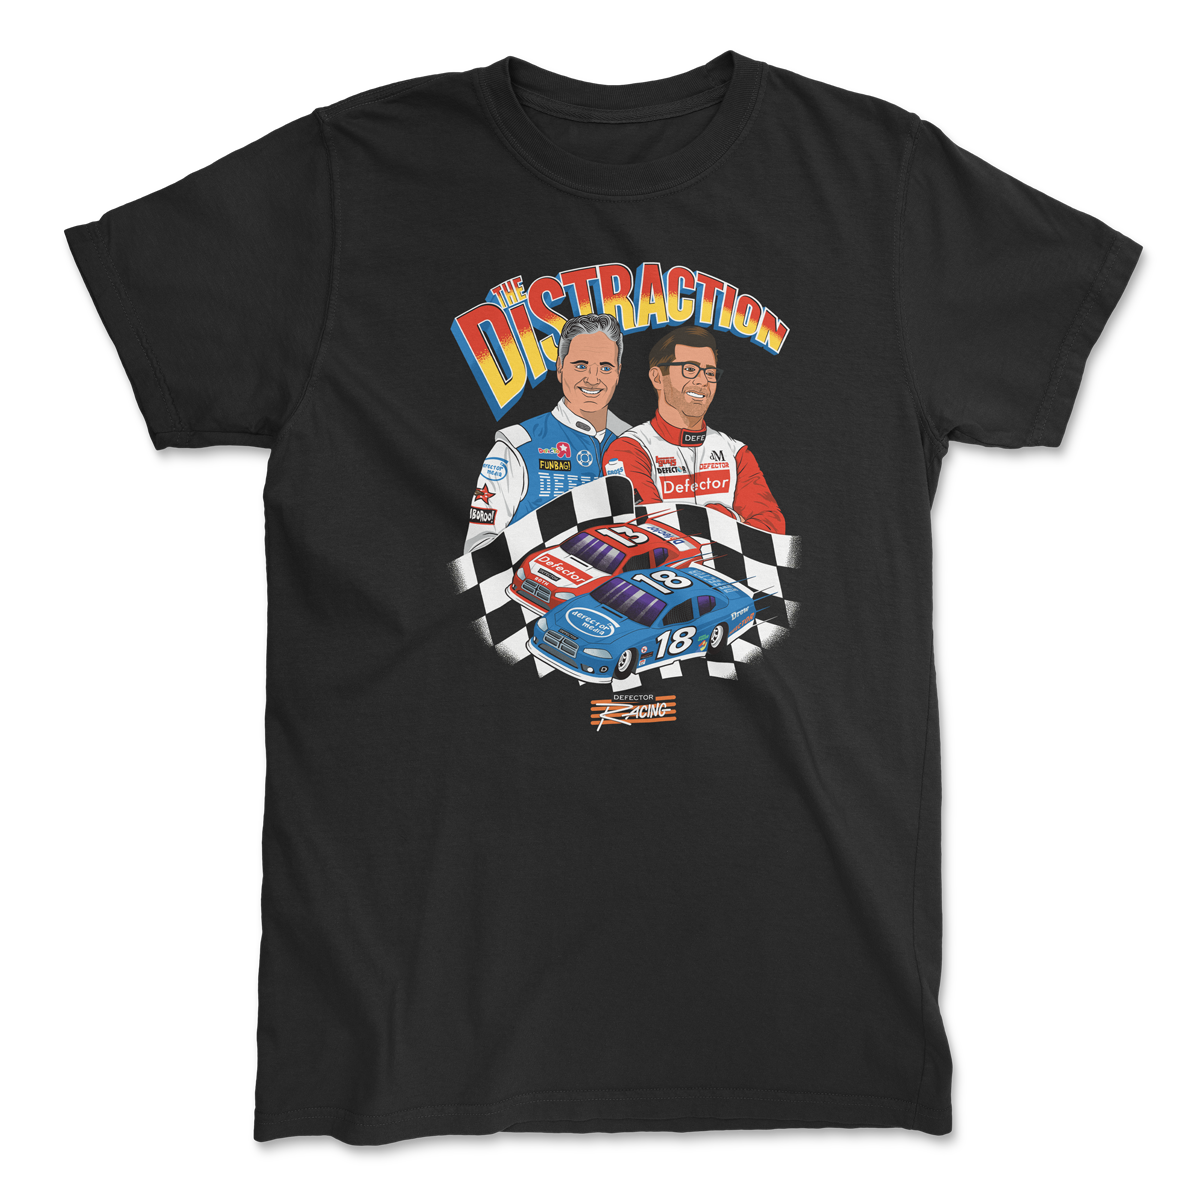 Distraction tee with drew and roth and an auto racing theme. Black t-shirt.